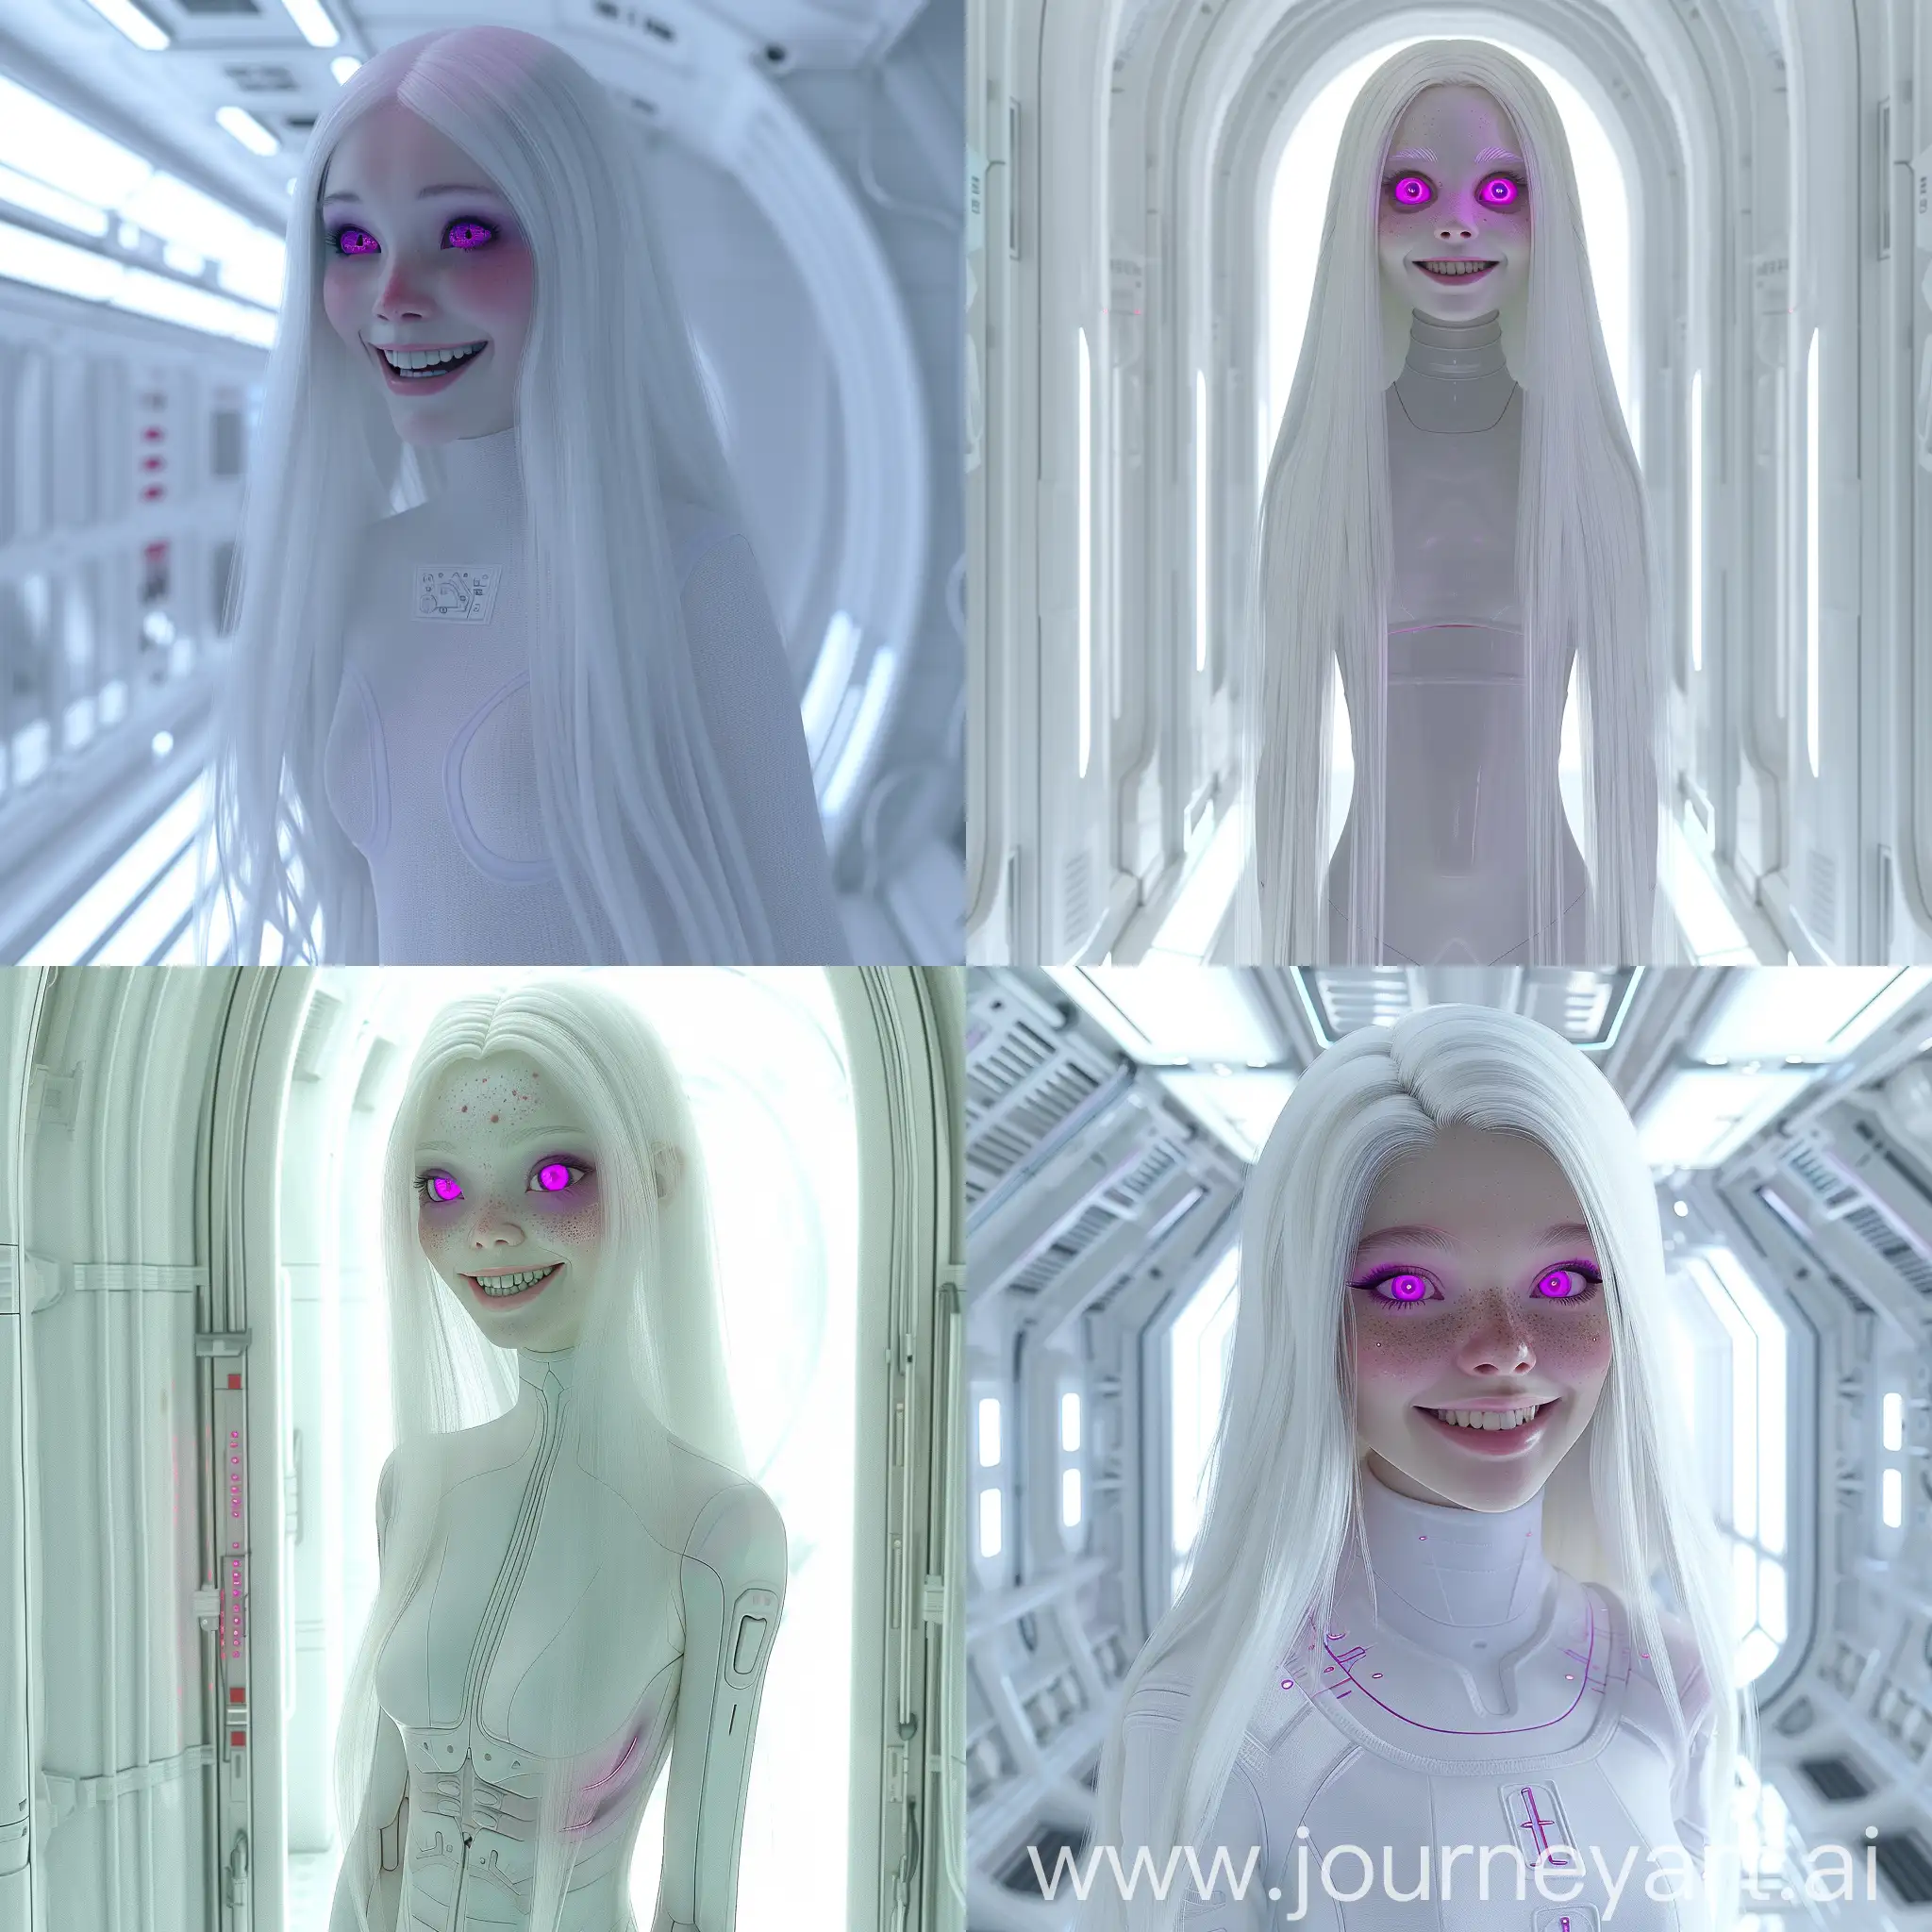 A Detailed Wide Shot Sci-Fi Style Photo Of A Cute Human Female With Bright Alien Violet Eyes, Long Cascading White Hair And Pale White Milky Skin, Tall Hourglass Figure, tall, great figure, Beautiful Face, Smiling And Standing, detailed, 3D, White Space Station Background, Beauty Model Shot, Adorable Smile, Young Adult, Early twenties, Attractive, High Quality, 8k, 4k.